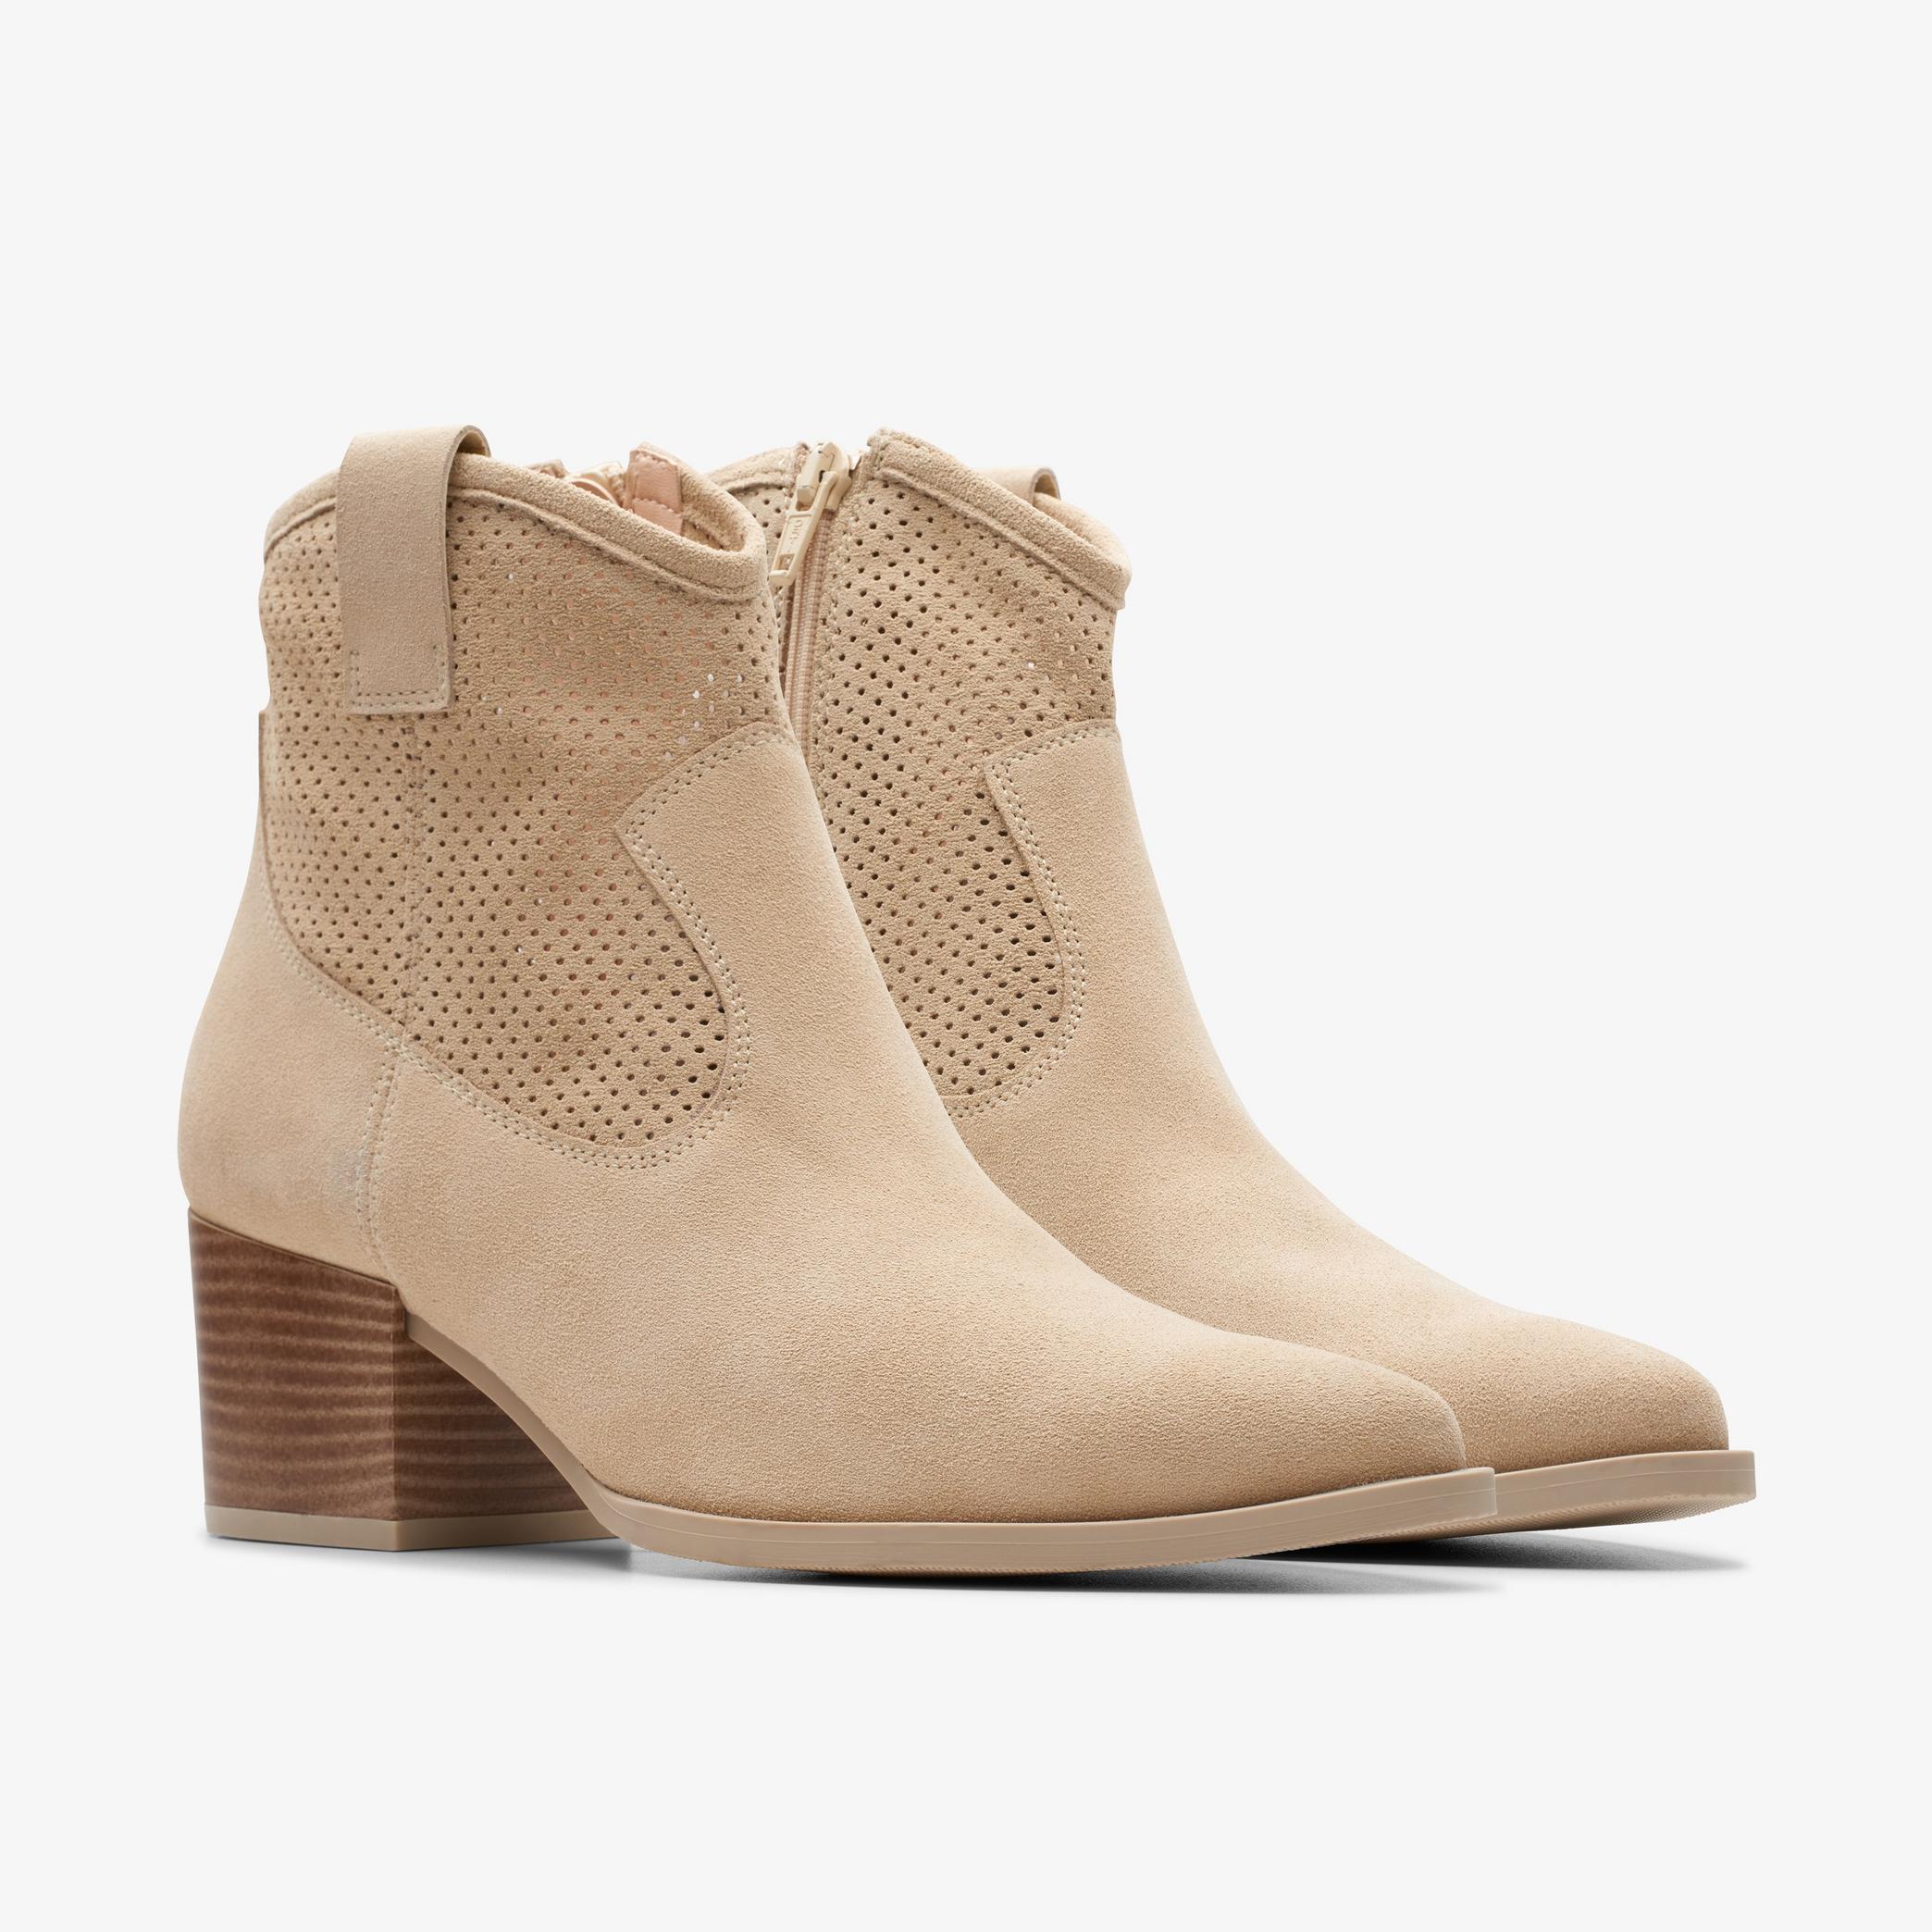 Elder Rae Sand Suede Boots, view 4 of 6